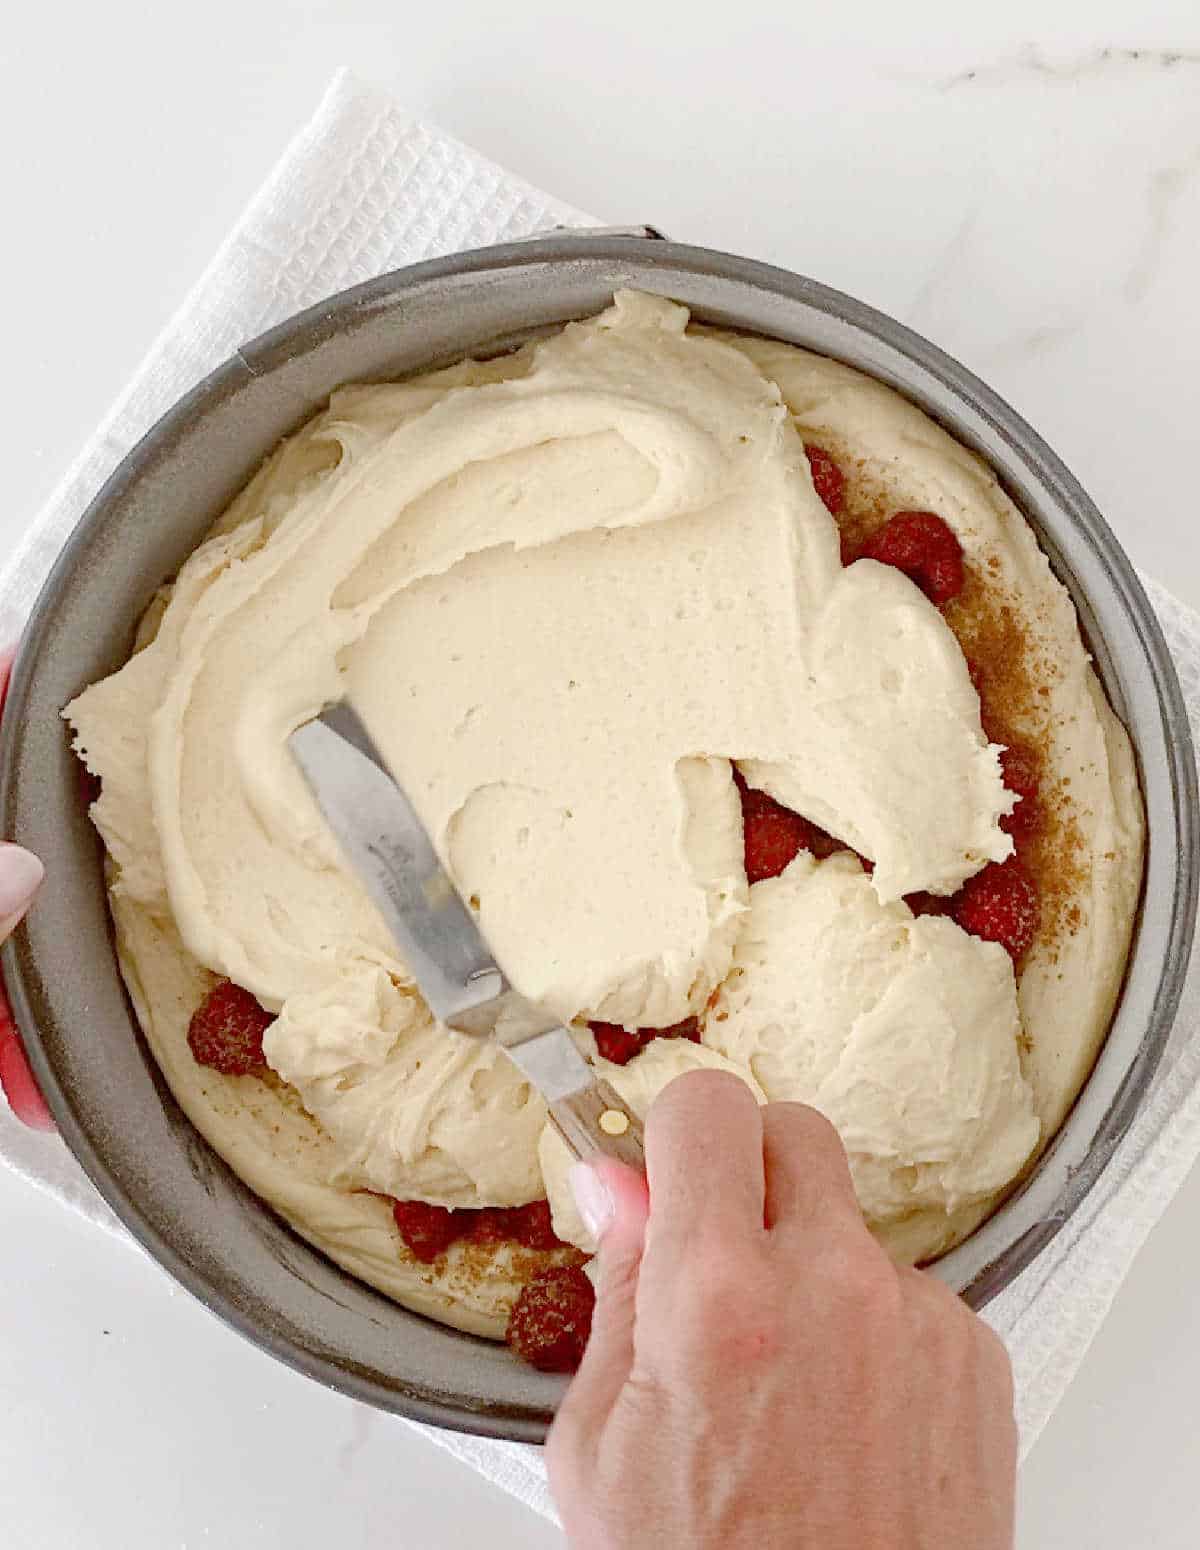 Spreading cake batter over raspberries in a round cake pan on a white surface.